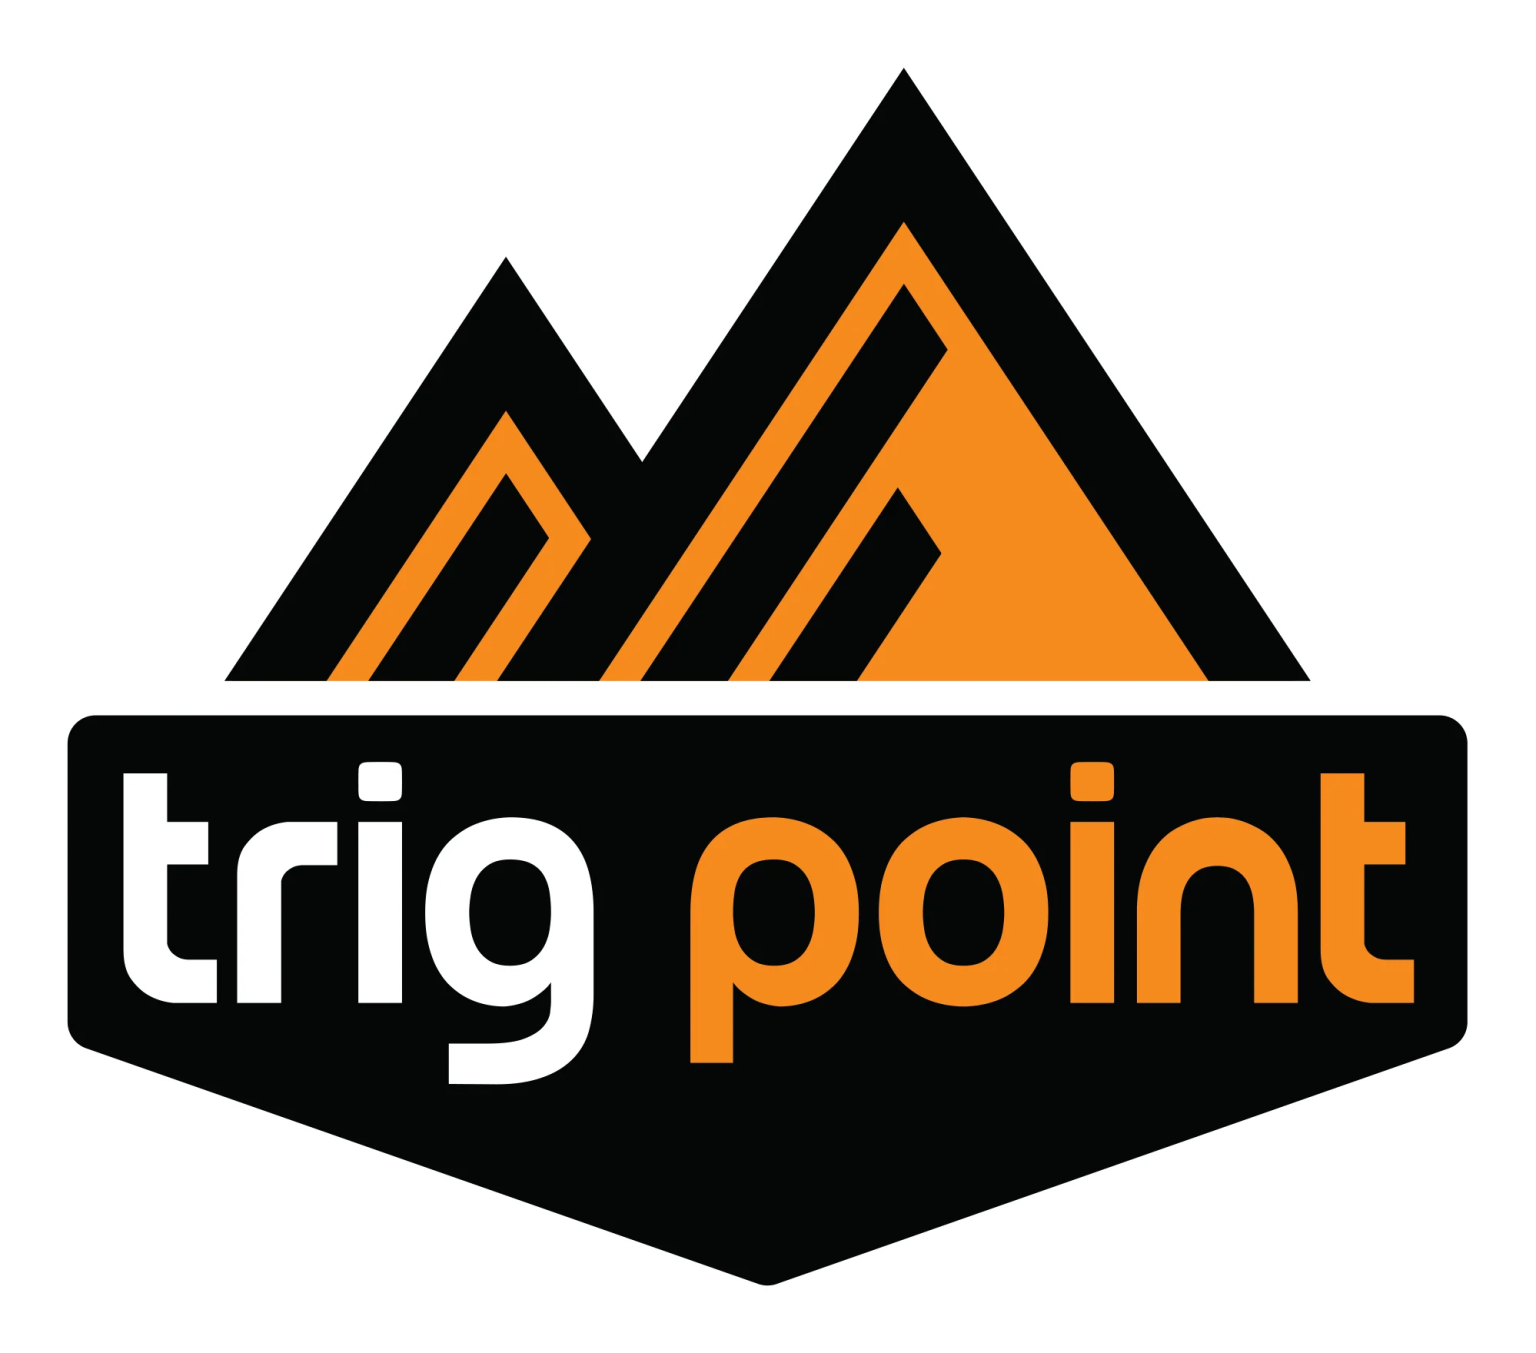 51800e59/trig point logo png